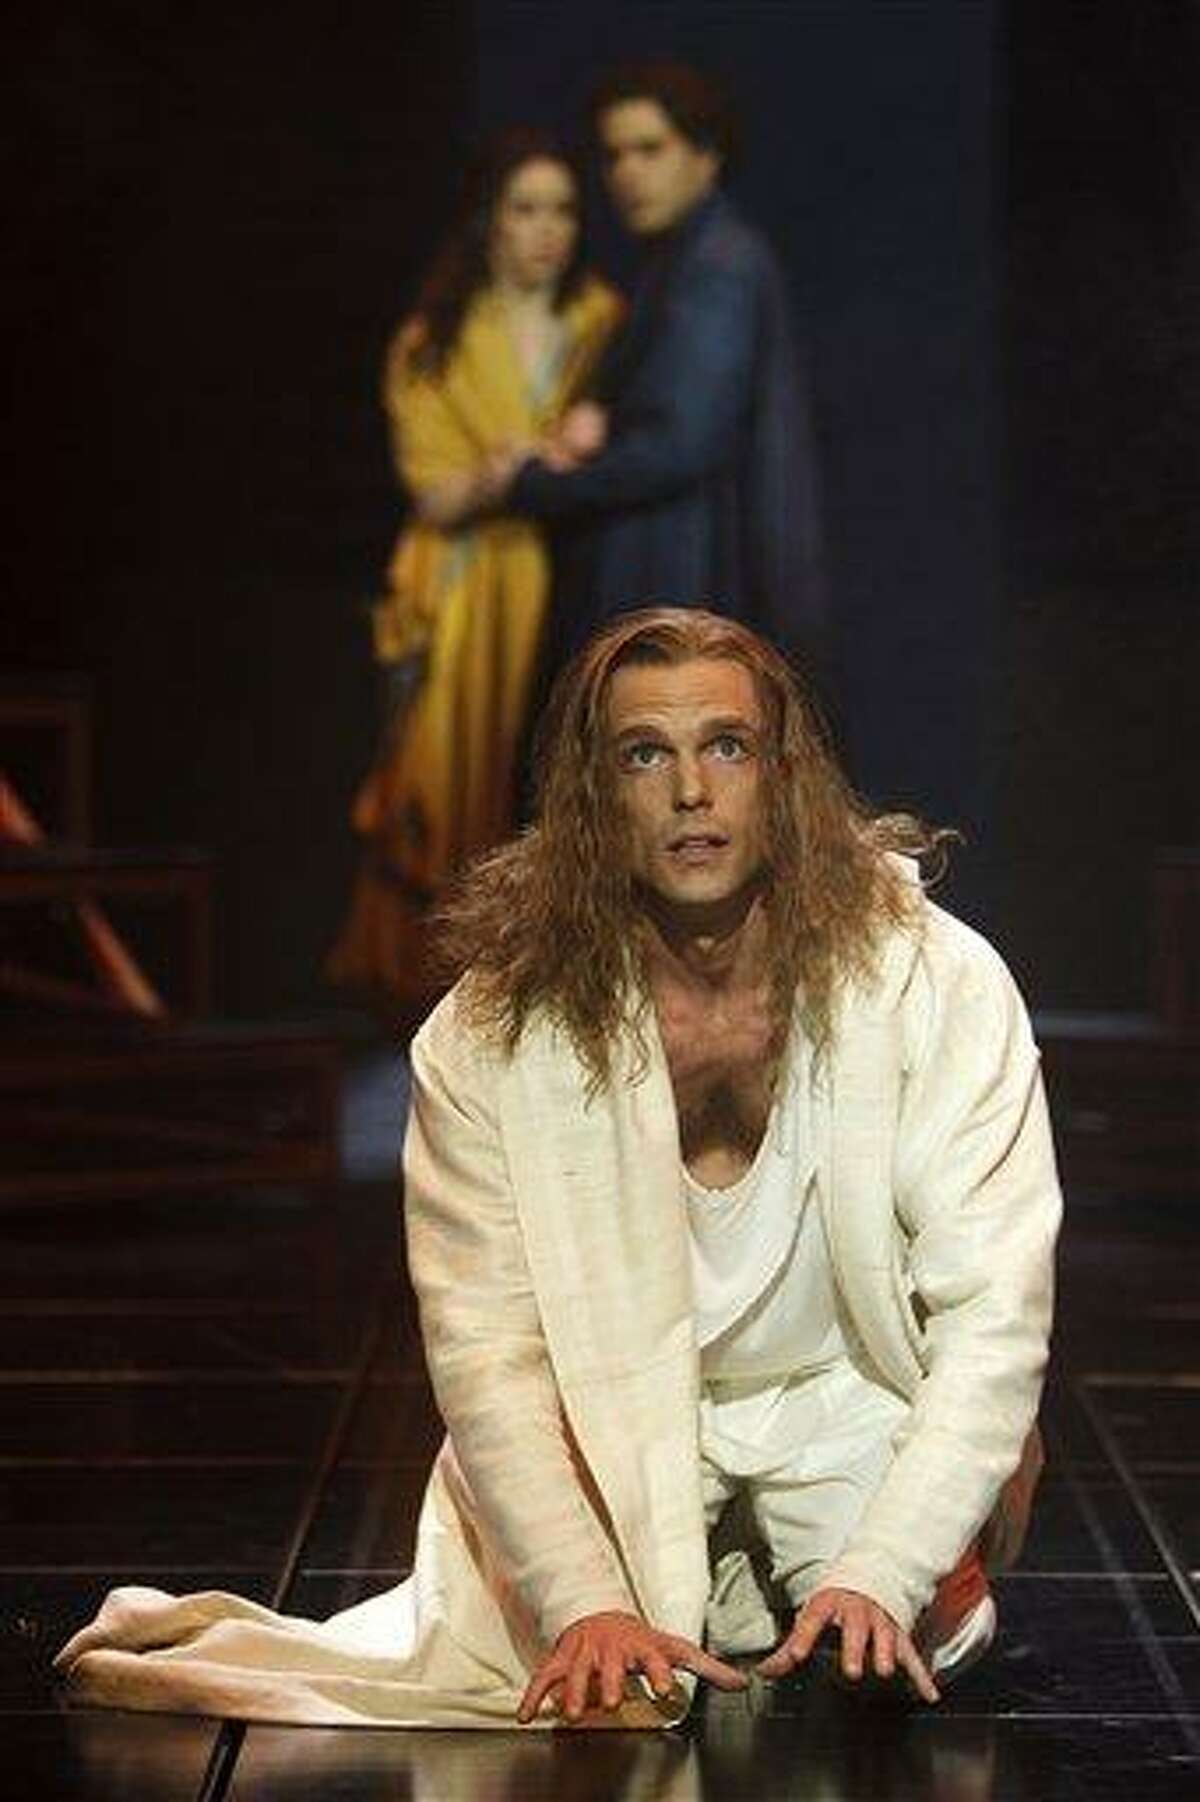 In this undated theater image released by the Stratford Shakespeare Festival, Paul Nolan portrays Jesus in "Jesus Christ Superstar," in a performance from the Stratford Shakespeare Festival in Stratford, Ontario. The Canadian production will be coming to Broadway, with previews beginning on March 1 at the Neil Simon Theatre and an official opening set for March 22. (AP Photo/Stratford Shakespeare Festival, David Hou)